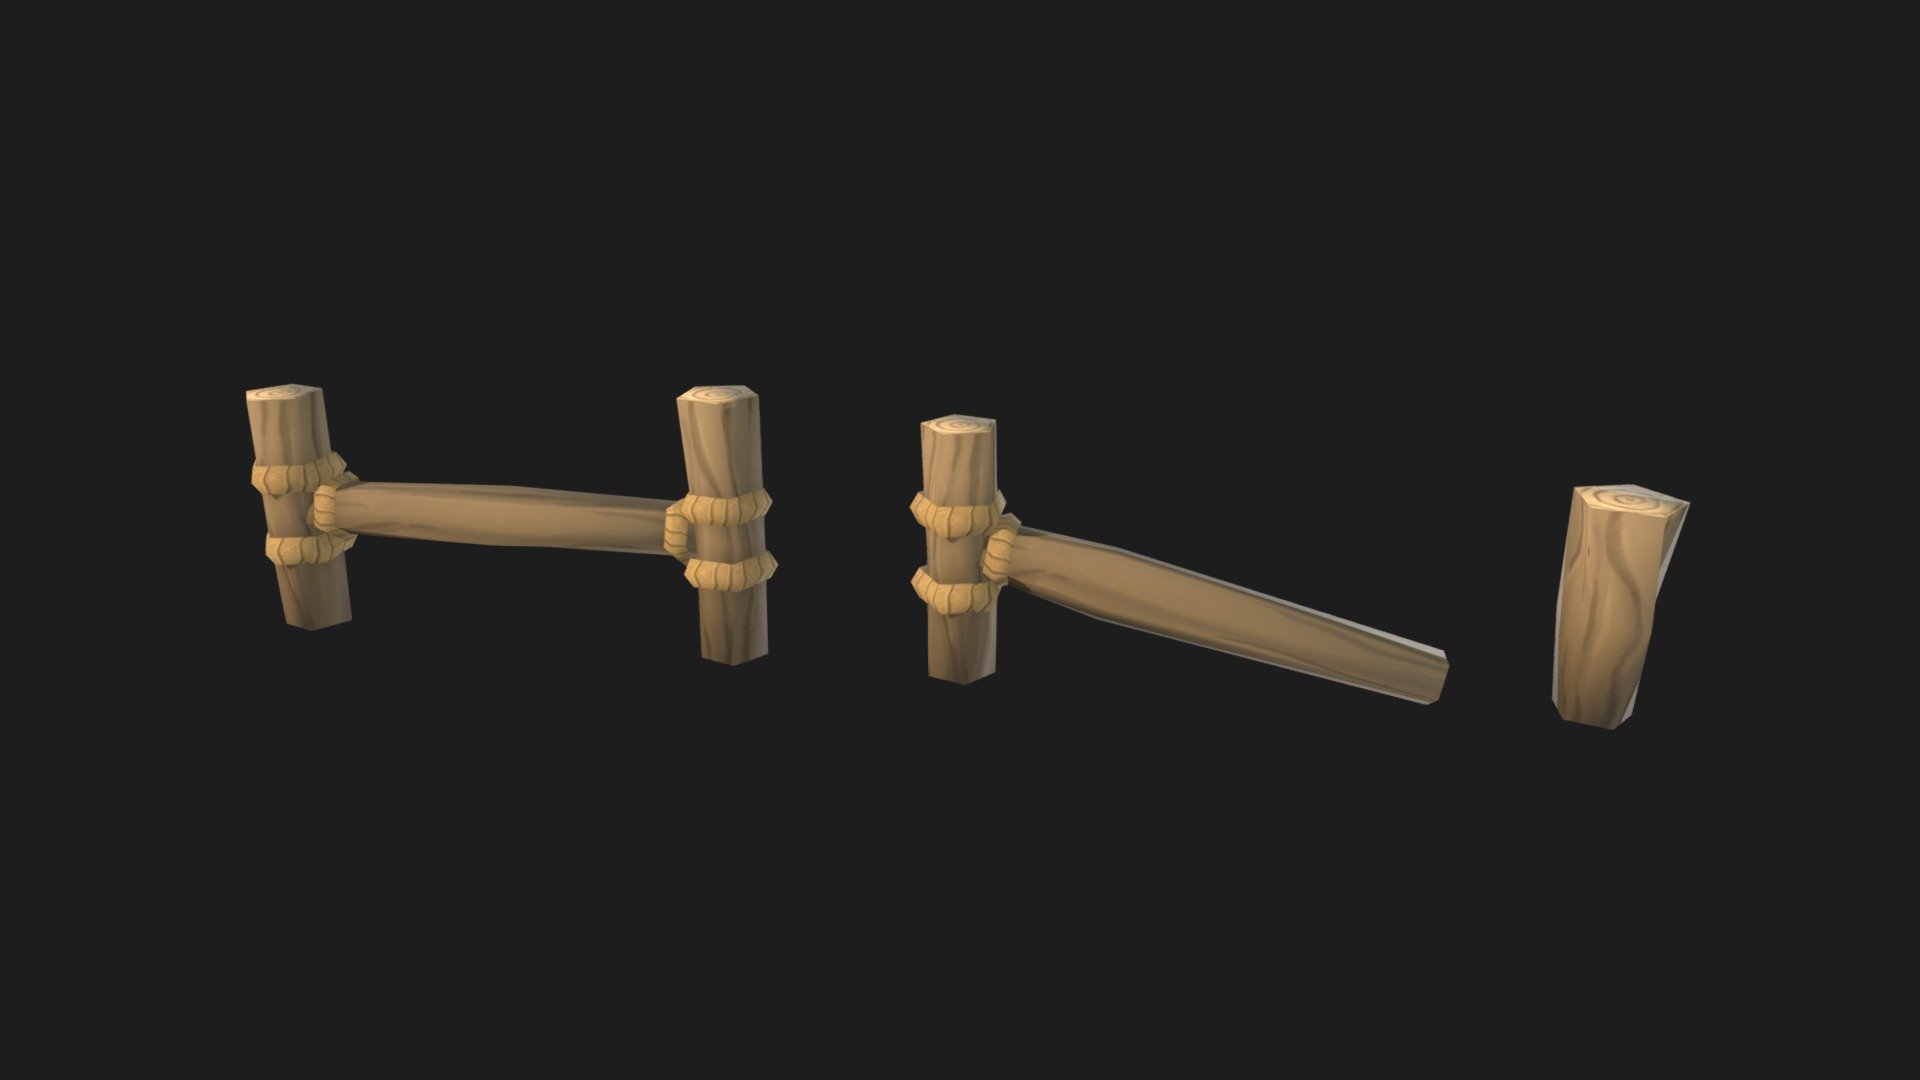 A modular wooden fence, heavily stylized, low poly and hand painted. I was trying to go for a &ldquo;World of Warcraft